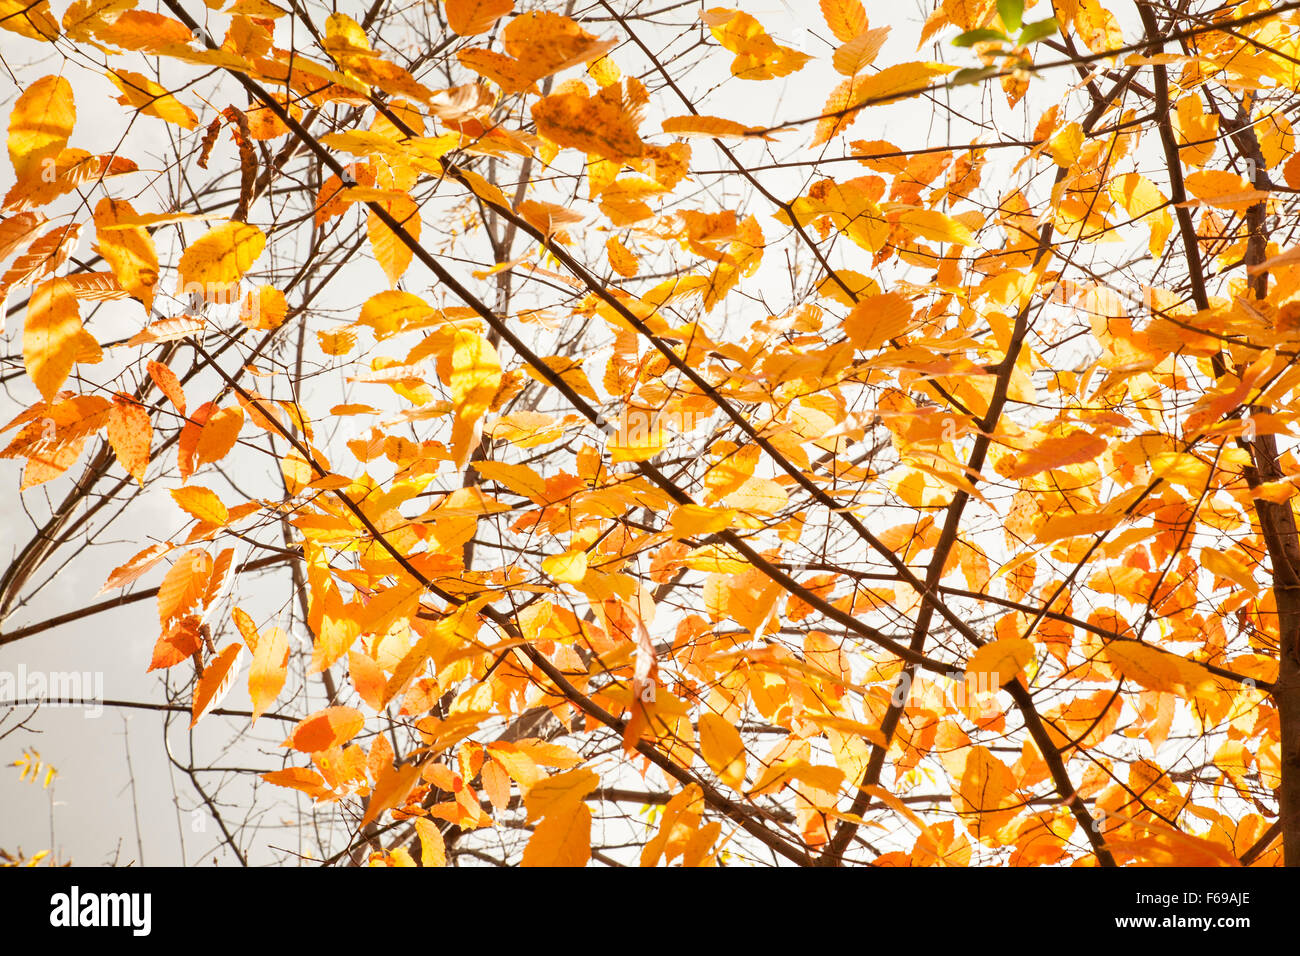 Yellow leaves cling to branches in the fall. Stock Photo